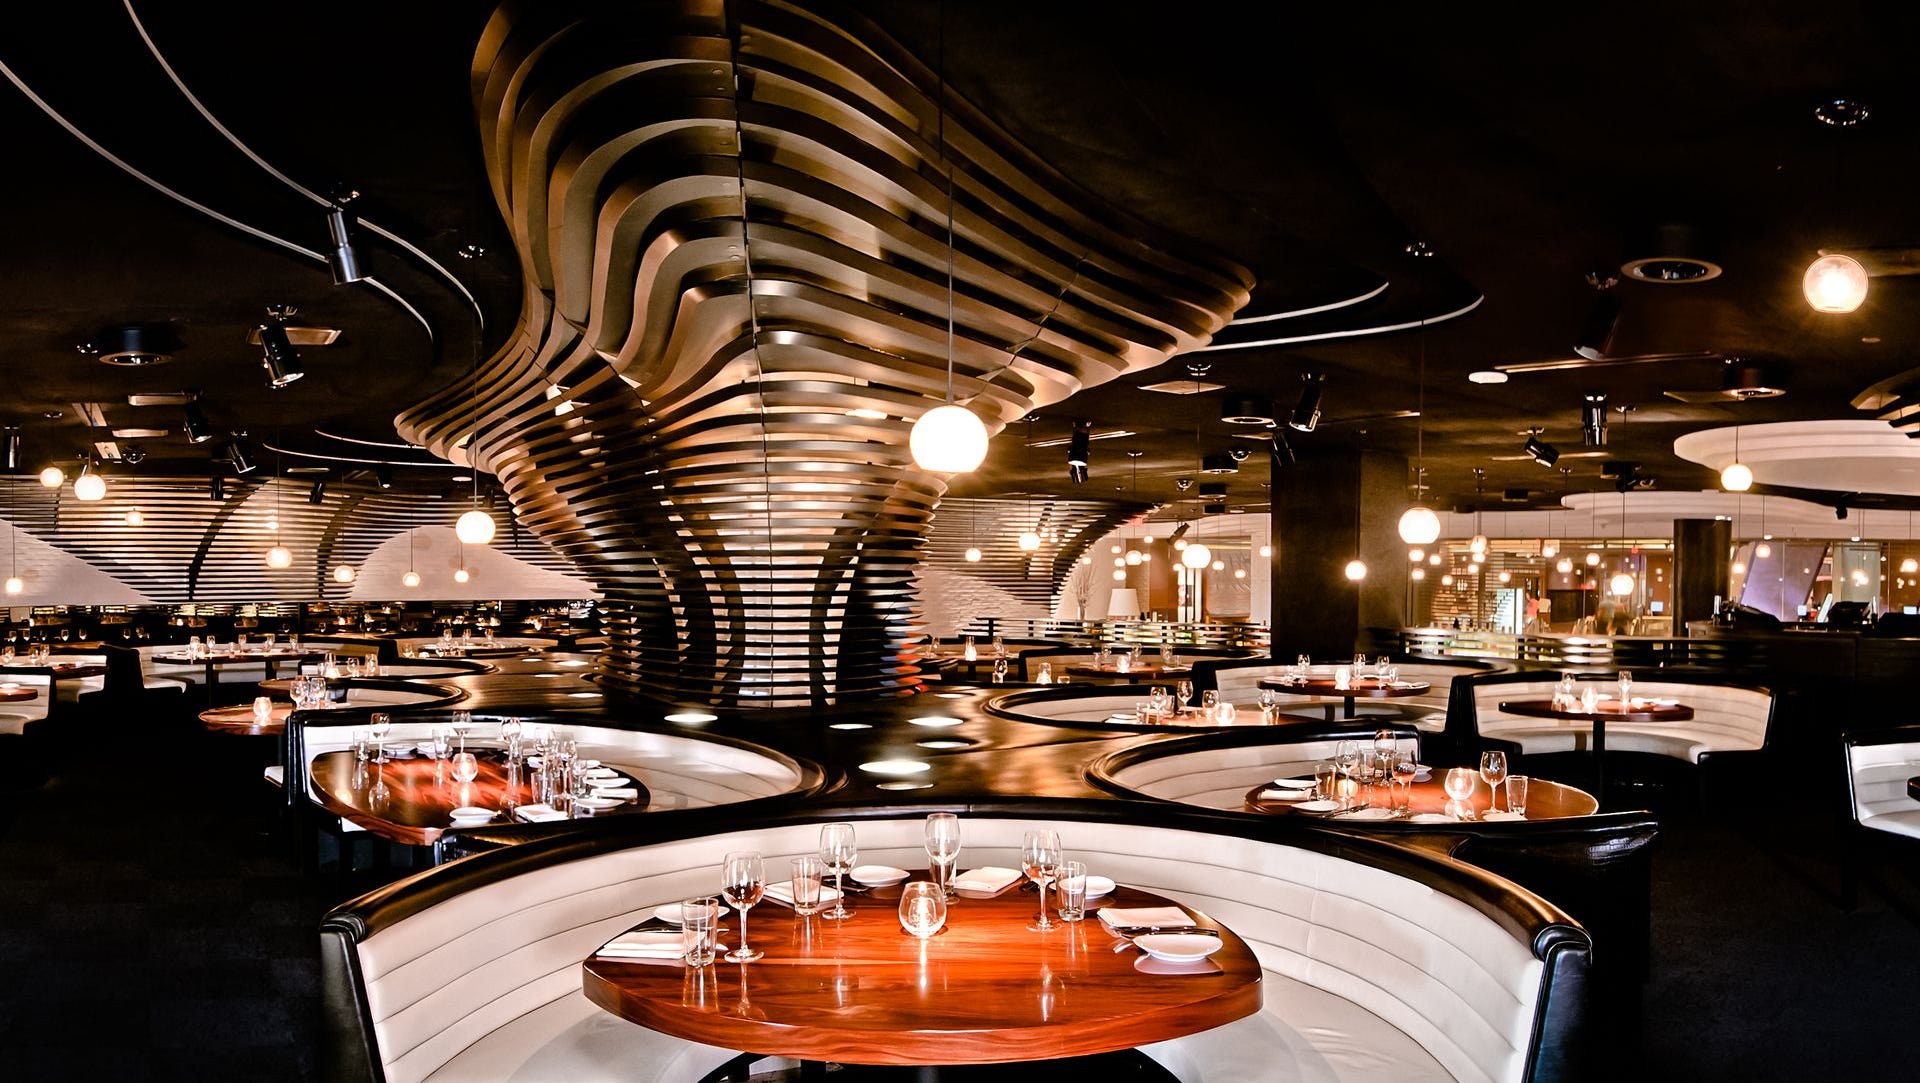 STK Steakhouse opens in Old Town Scottsdale. Here